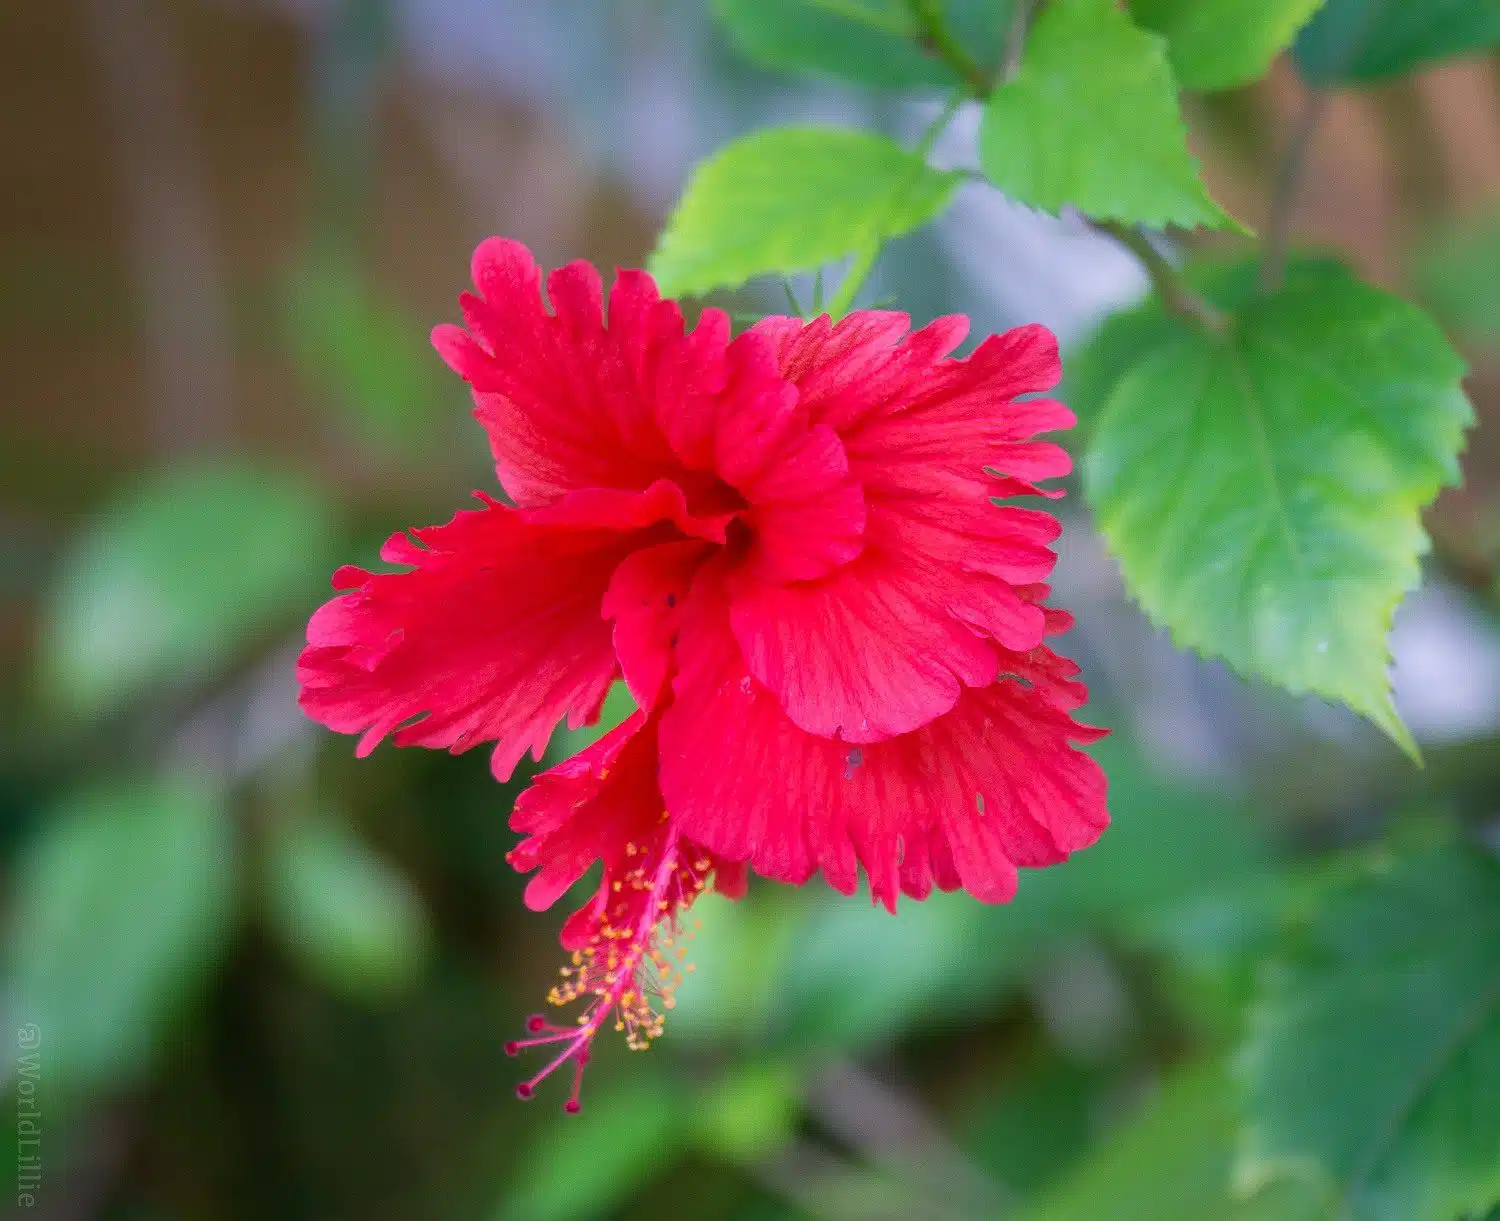 A solo flower, happy and frilly in red.